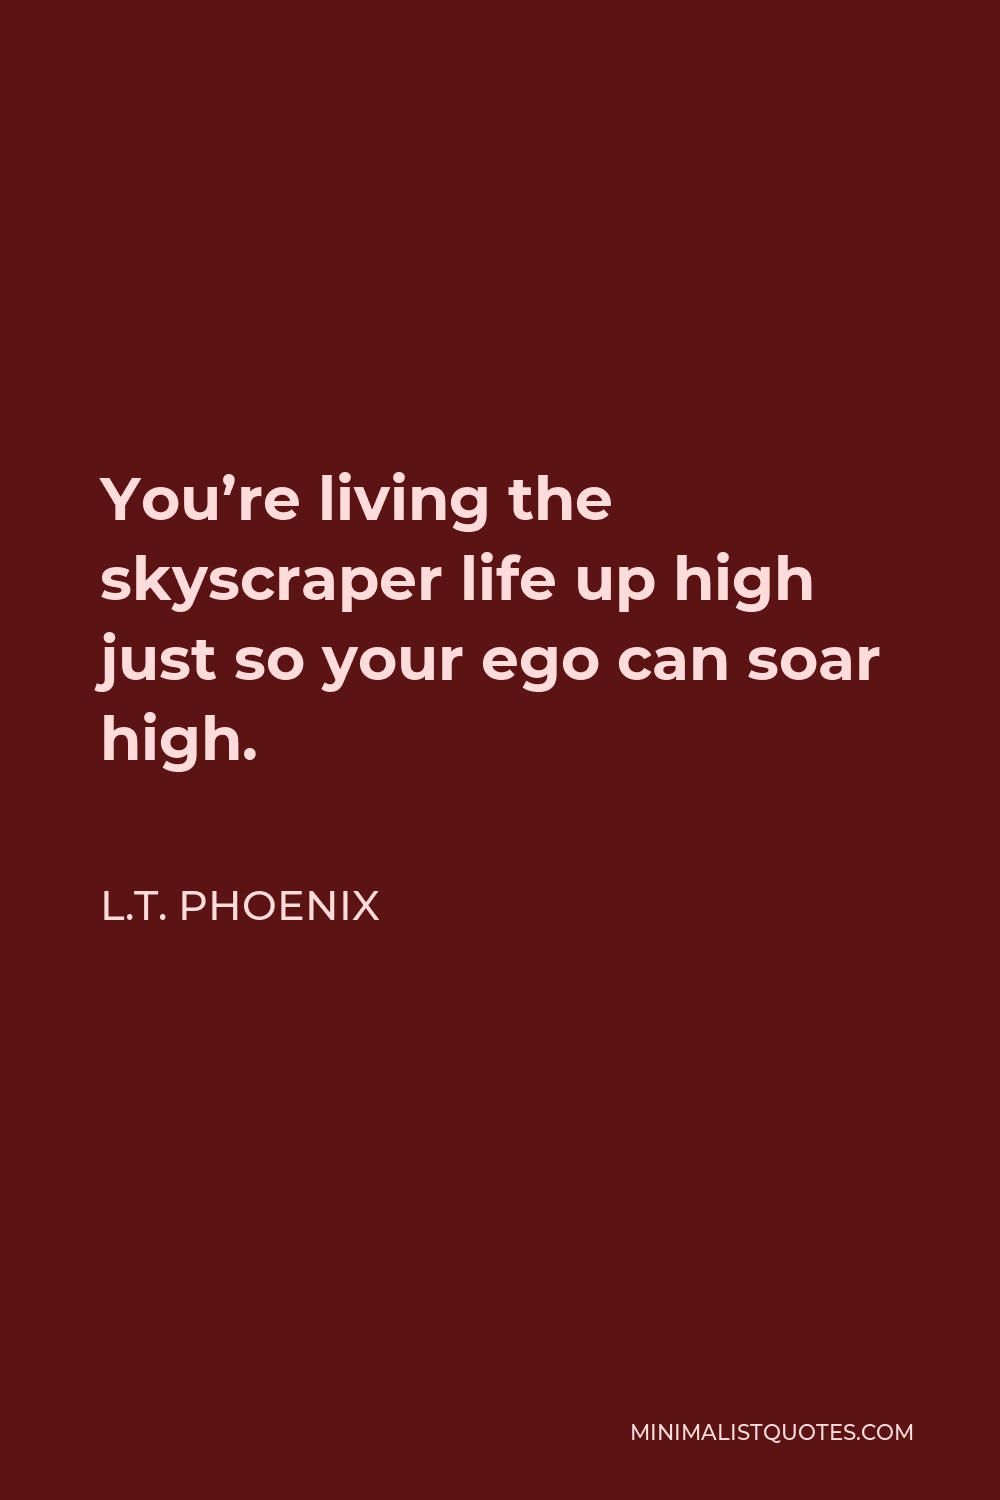 L.T. Phoenix Quote - You’re living the skyscraper life up high just so your ego can soar high.